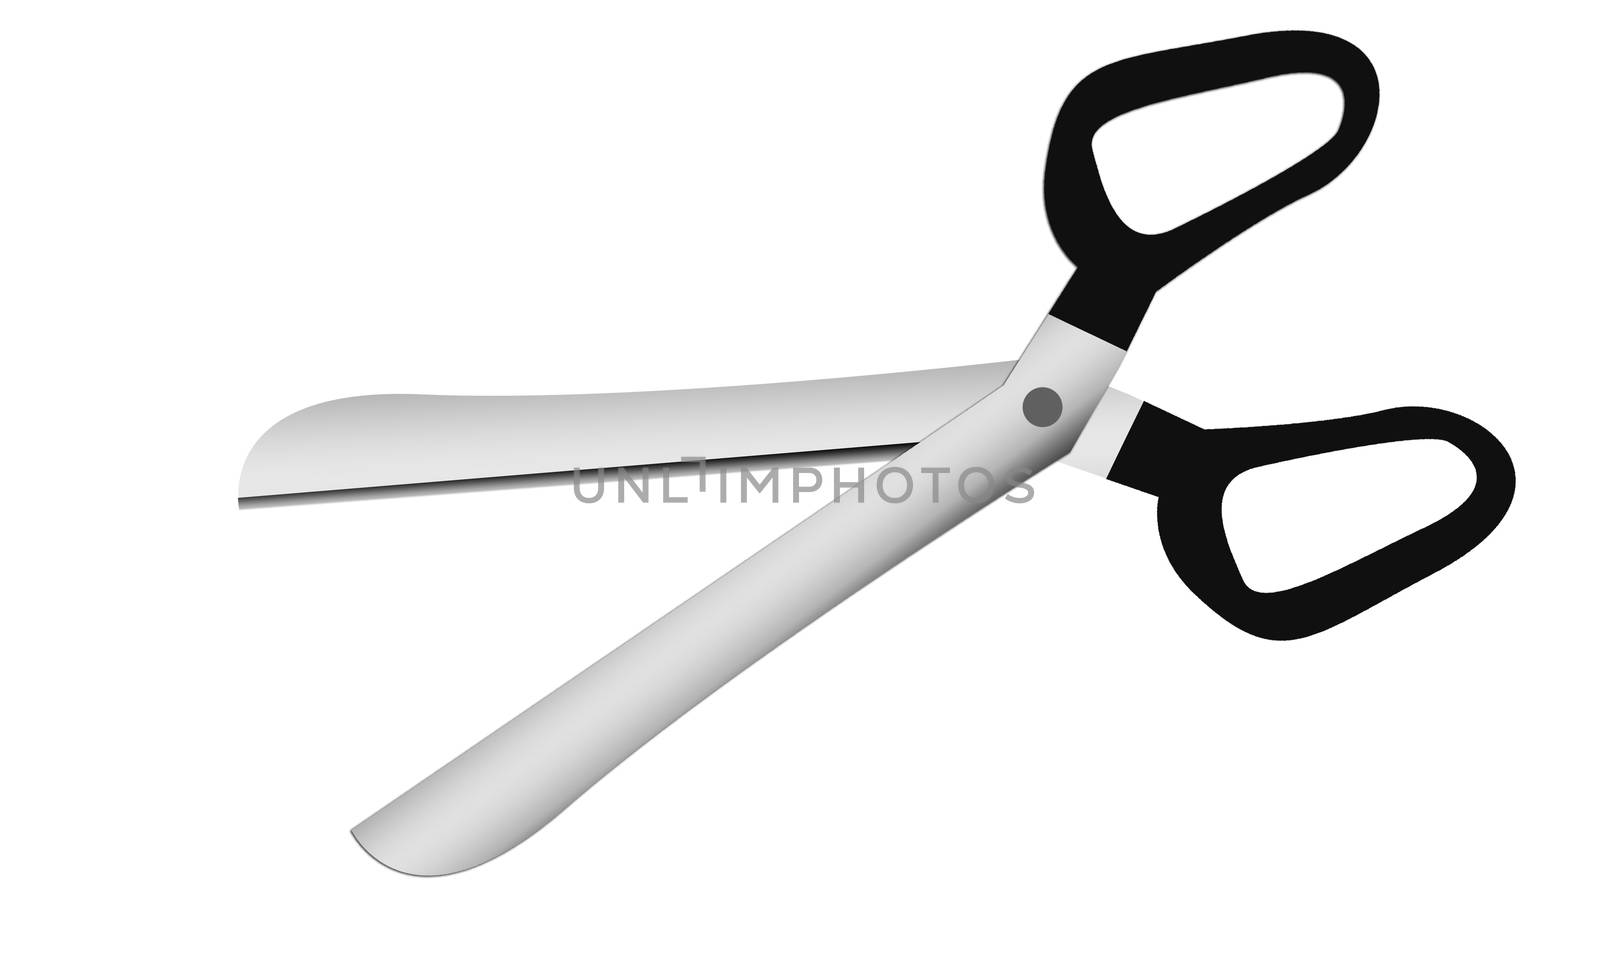 Stationery scissor isolated on white background. 3d rendering